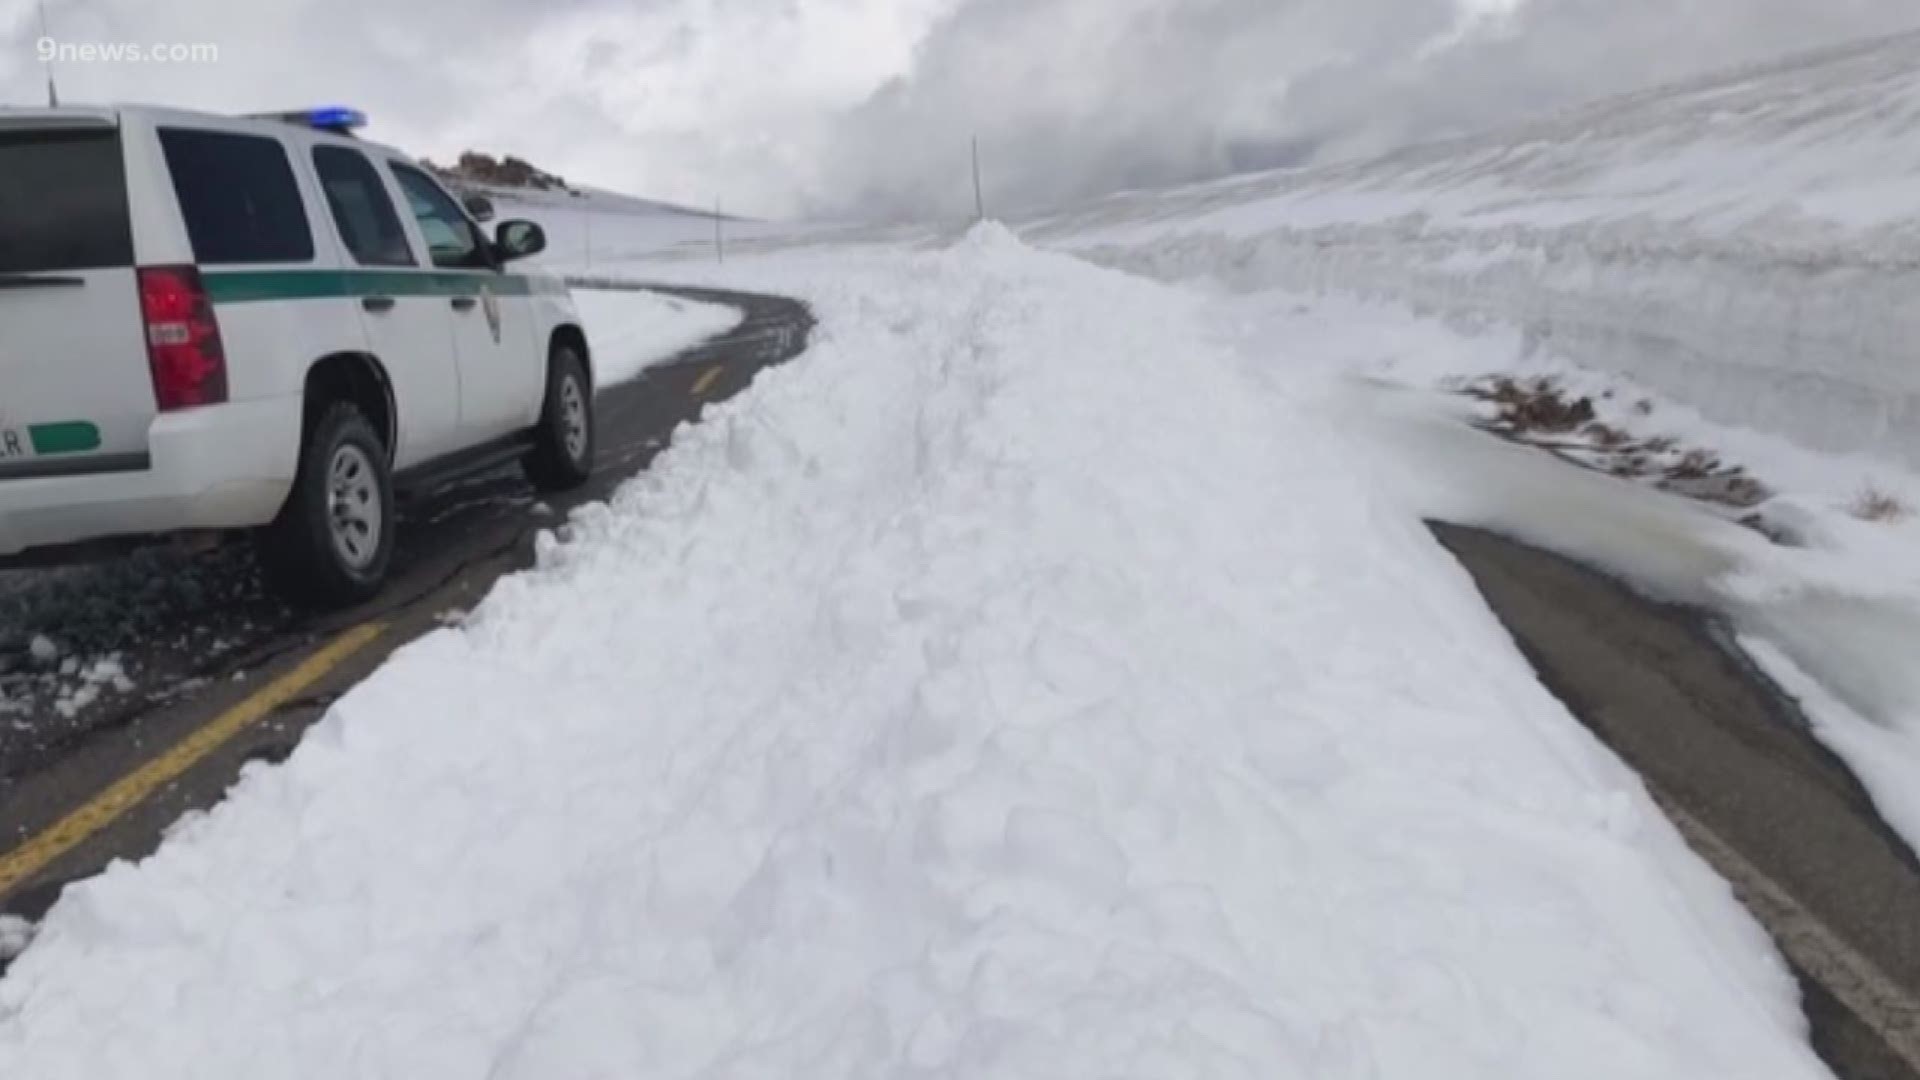 A wintery blast has closed the high elevation road at RMNP.